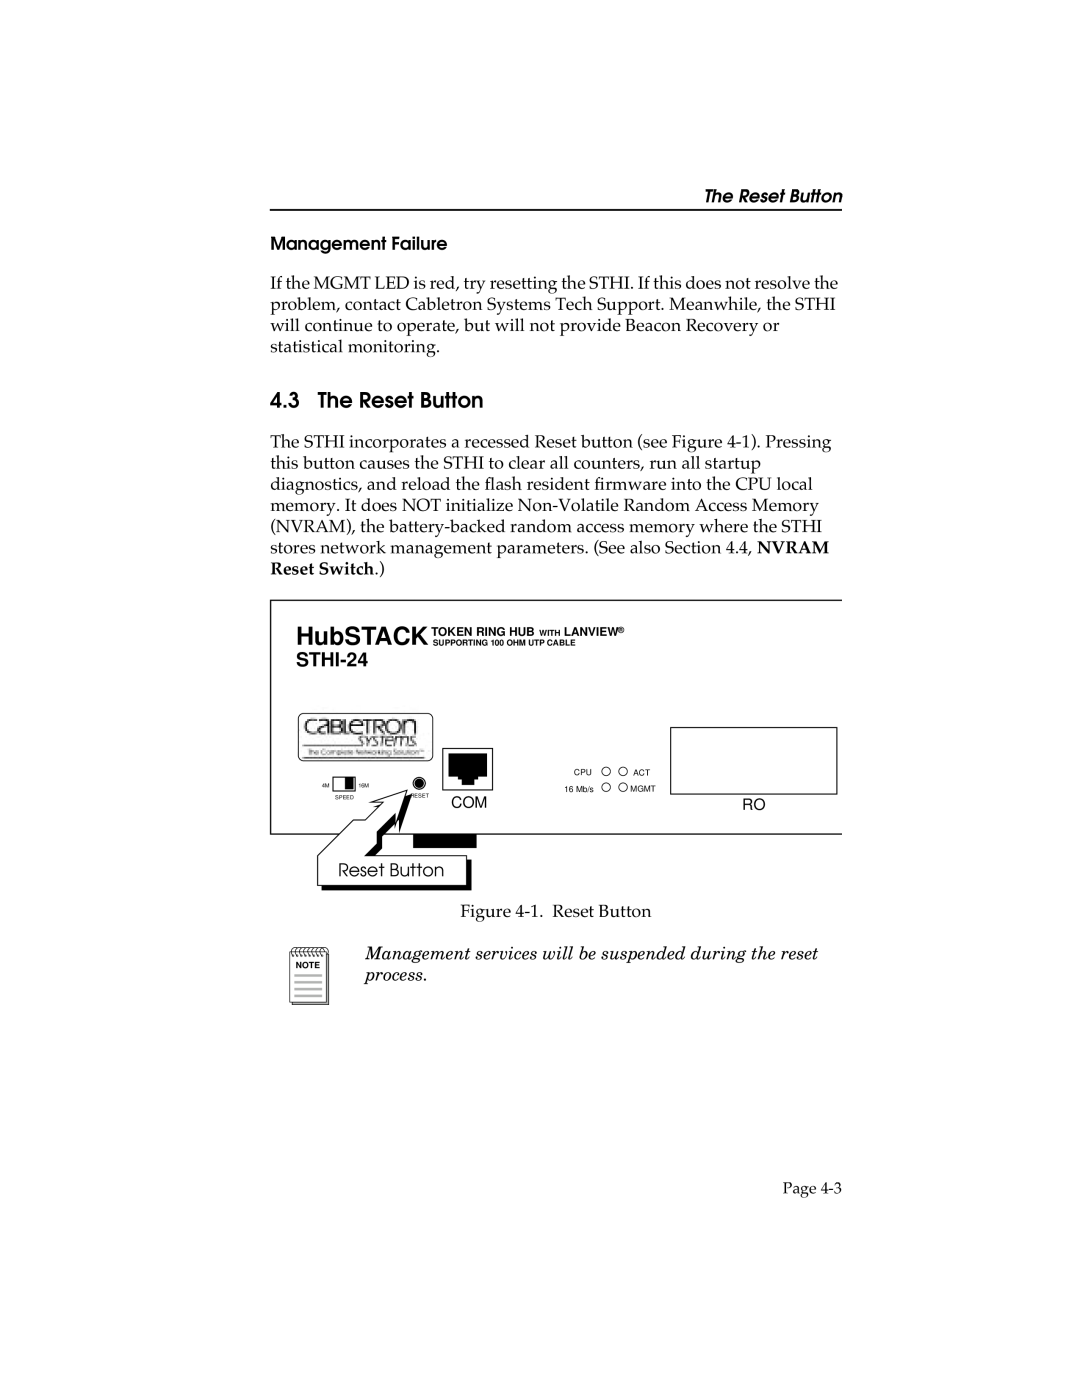 Cabletron Systems manual The Reset Button, STHI-24, Management Failure 